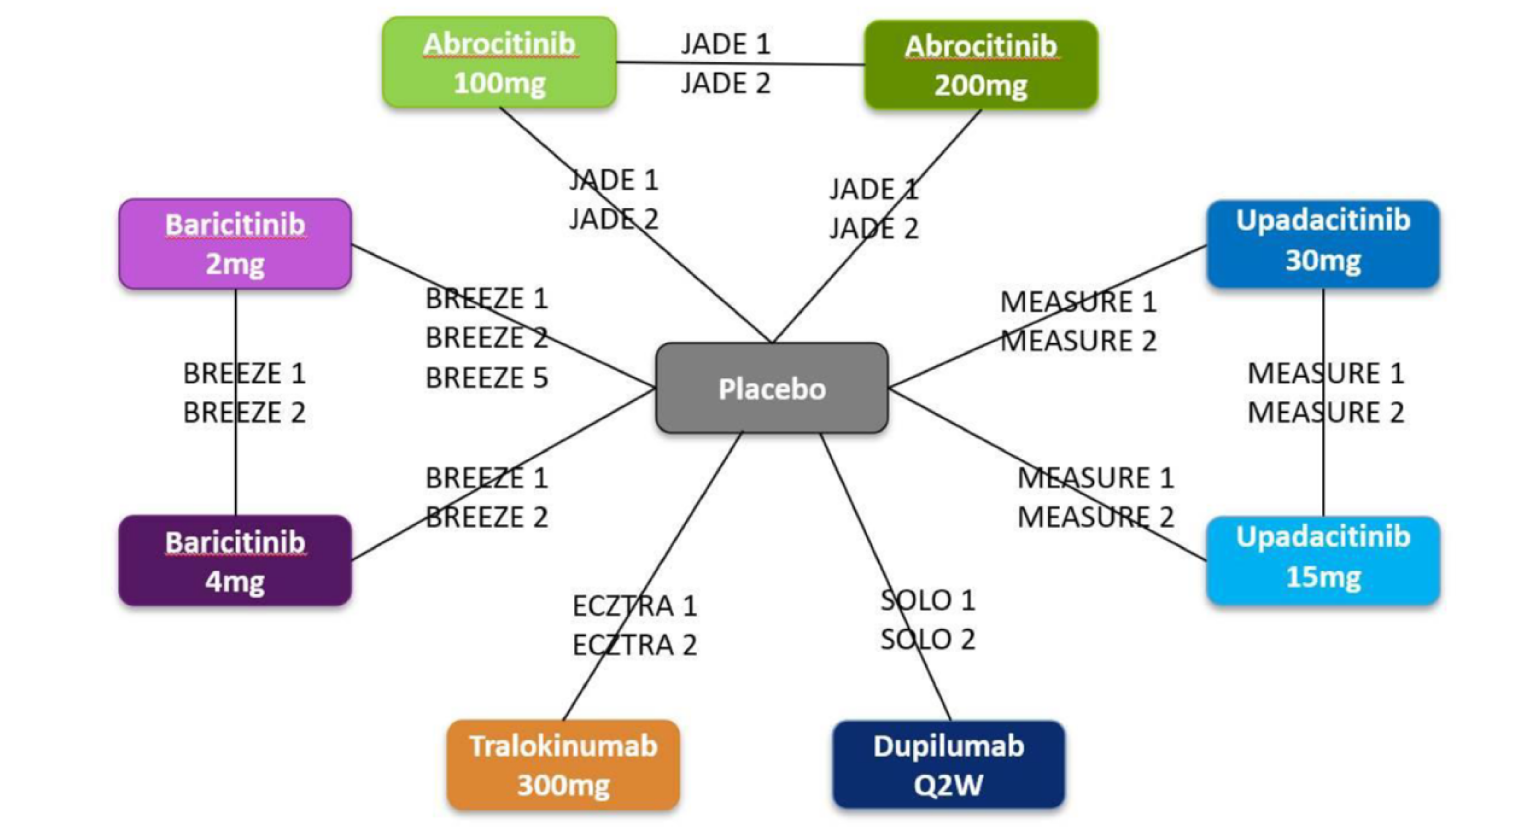 Figure depicts the network plot of monotherapy randomized controlled trials, including abrocitinib 100 mg, abrocitinib 200 mg, baricitinib 2 mg, baricitinib 4 mg, upadacitinib 30 mg, tralokinumab, and dupilumab all directly connected to each other and to placebo at the centre.